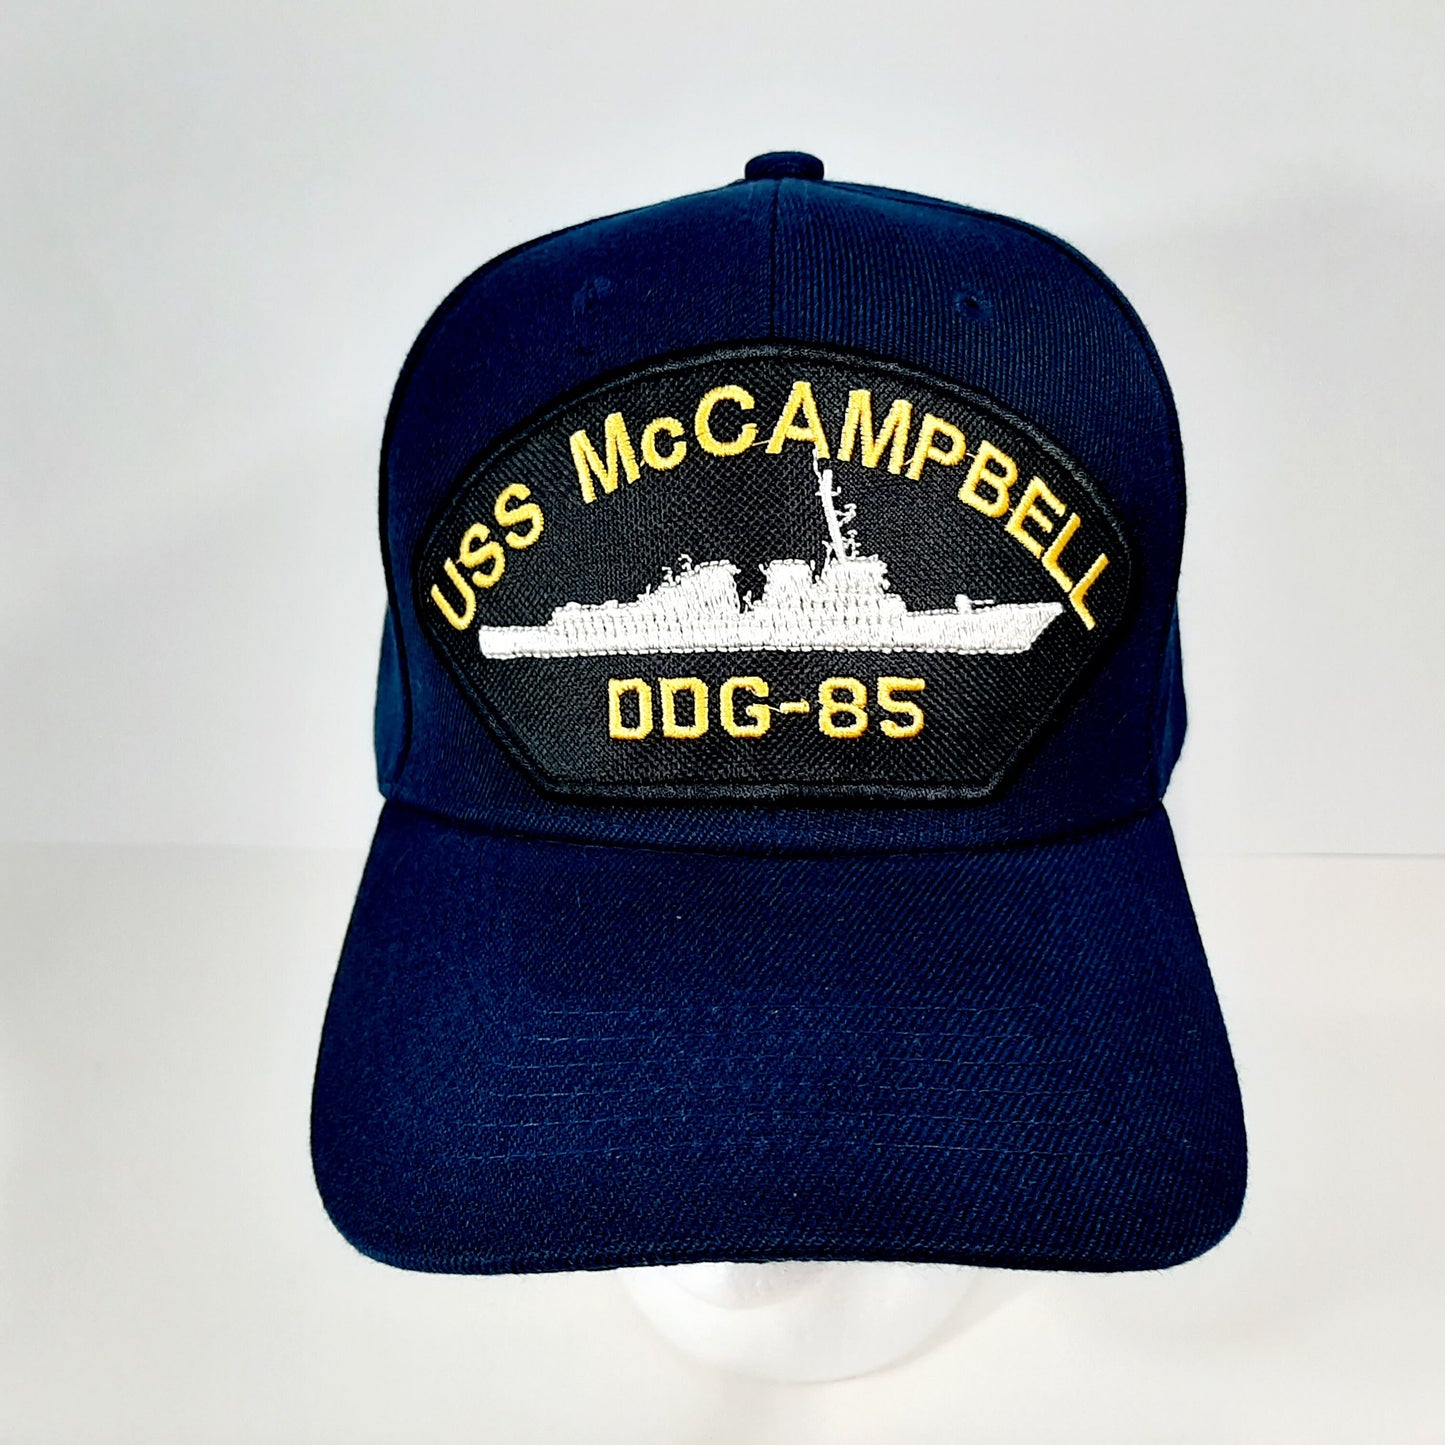 USS McCAMPBELL DDG-85 US Navy Embroidered Patch Hat Baseball Cap Blue